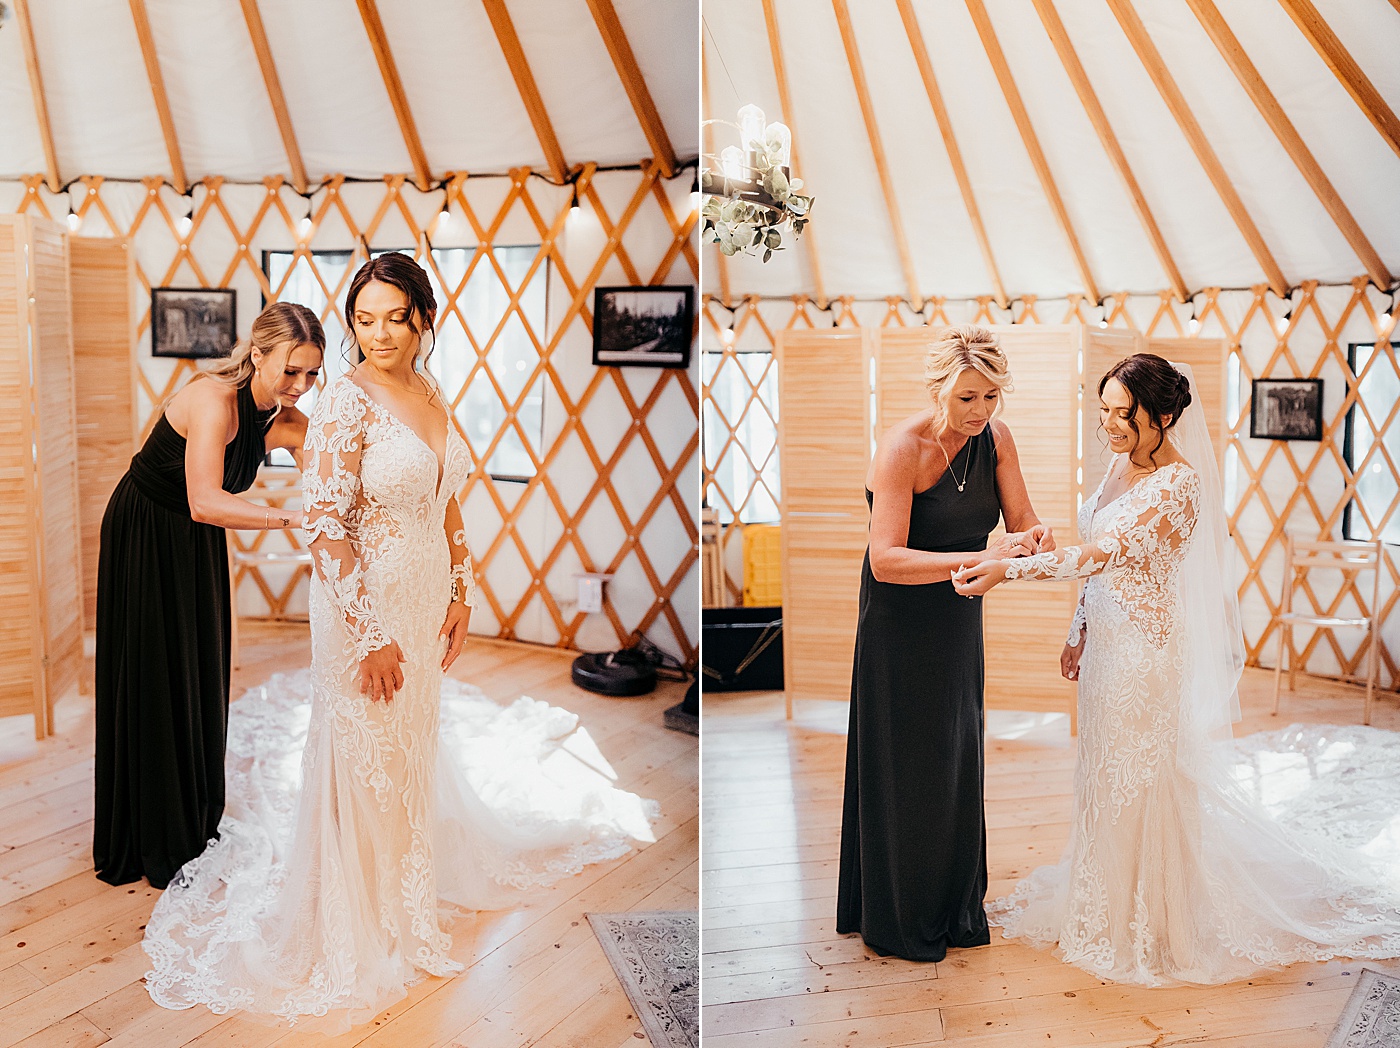 Bride getting ready at Emerald Forest Treehouse | Photo by Megan Montalvo Photography